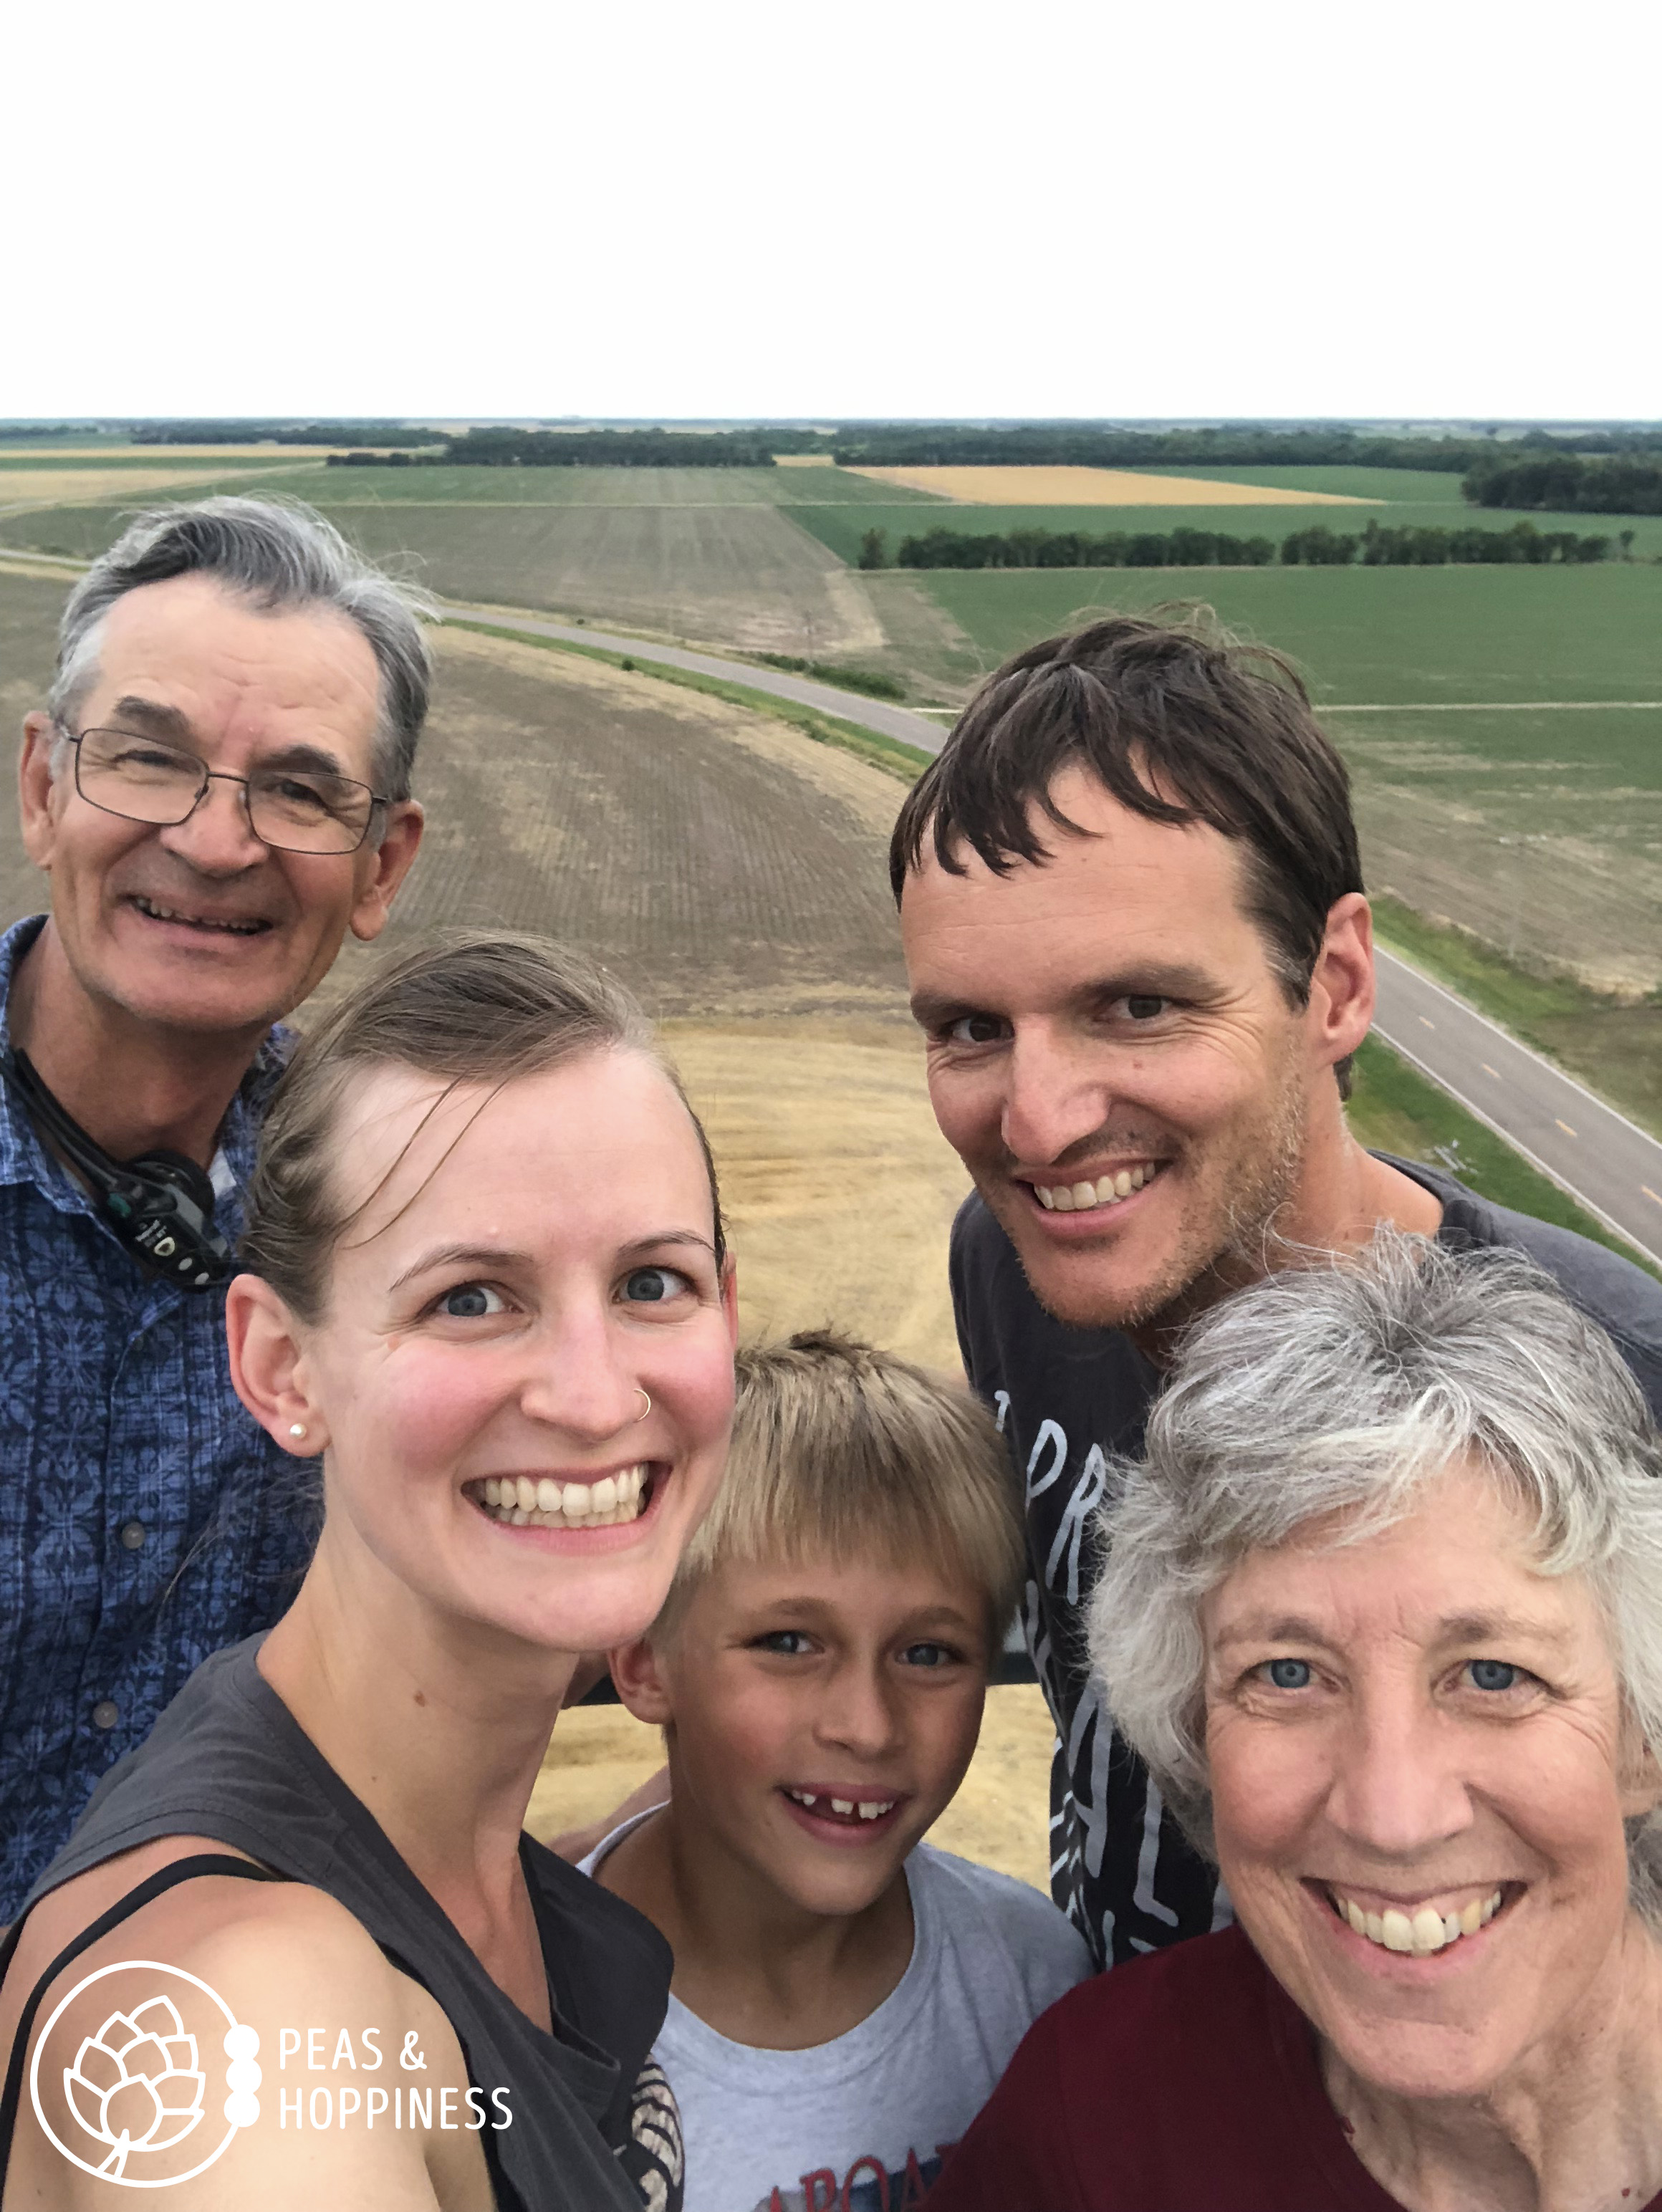 Our kind of entertainment: climbing to the top of my parents’ grain-handling facility with the family!